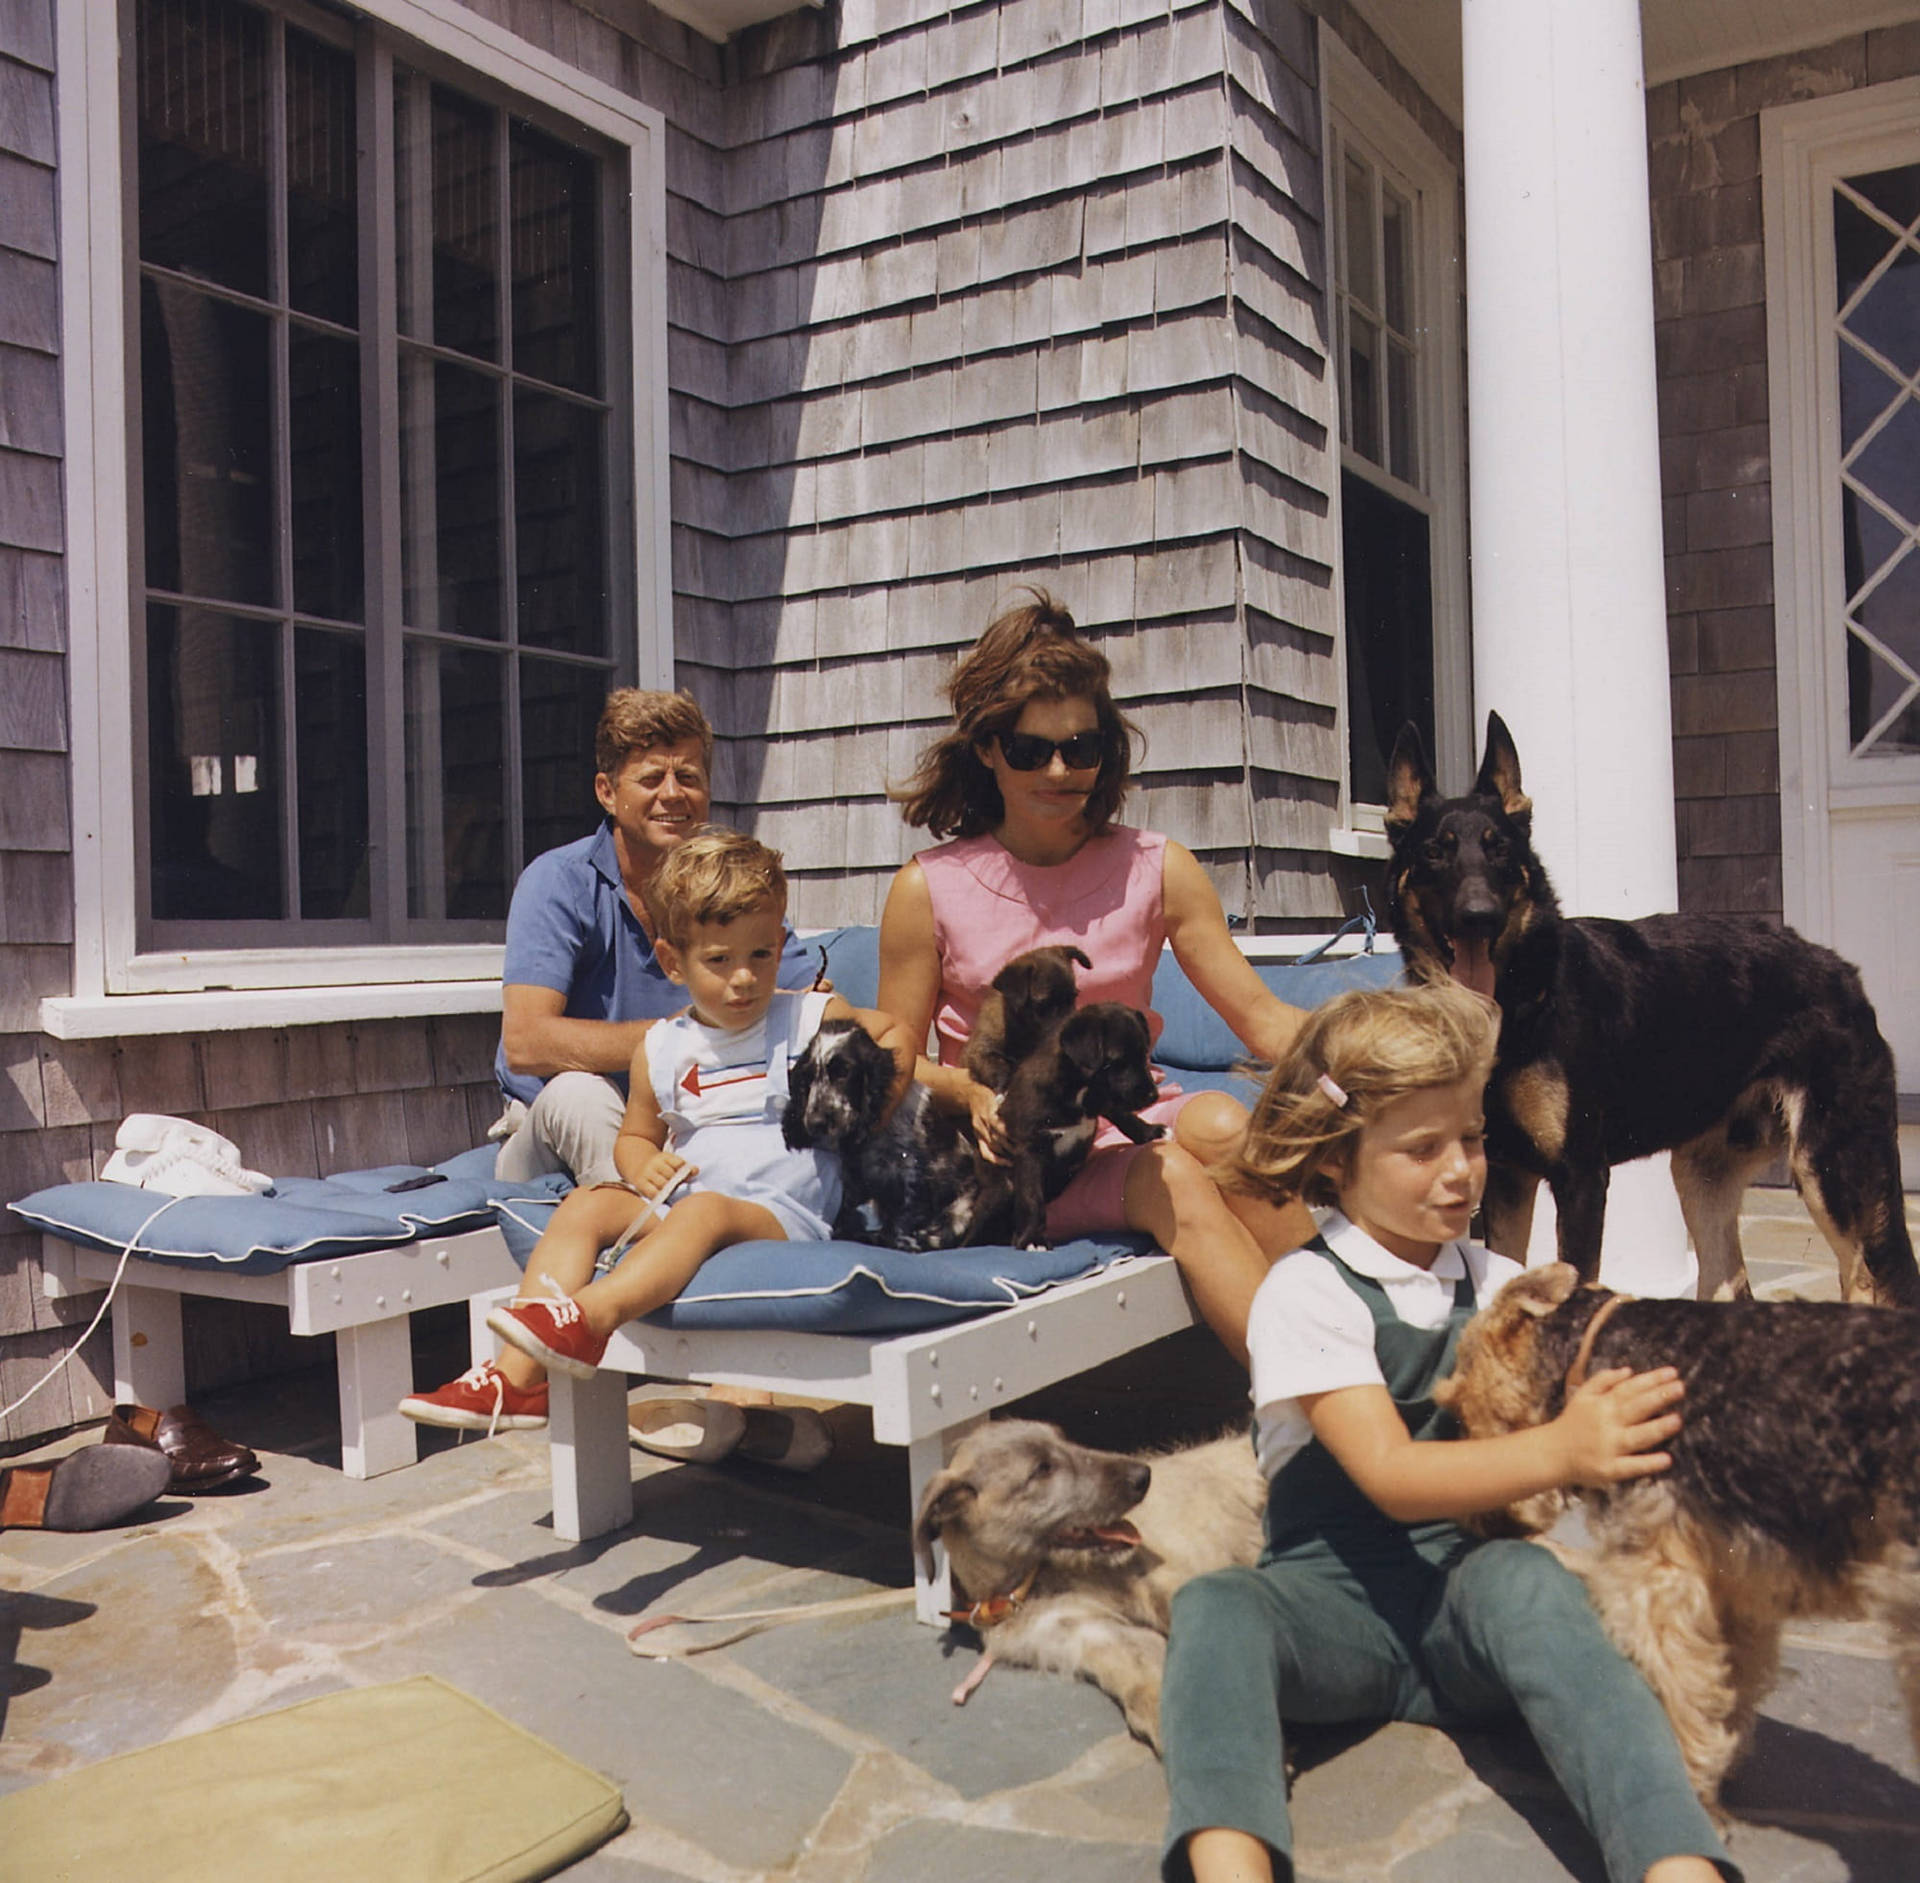 John F. Kennedy With His Family In An Intimate Home Scene Background